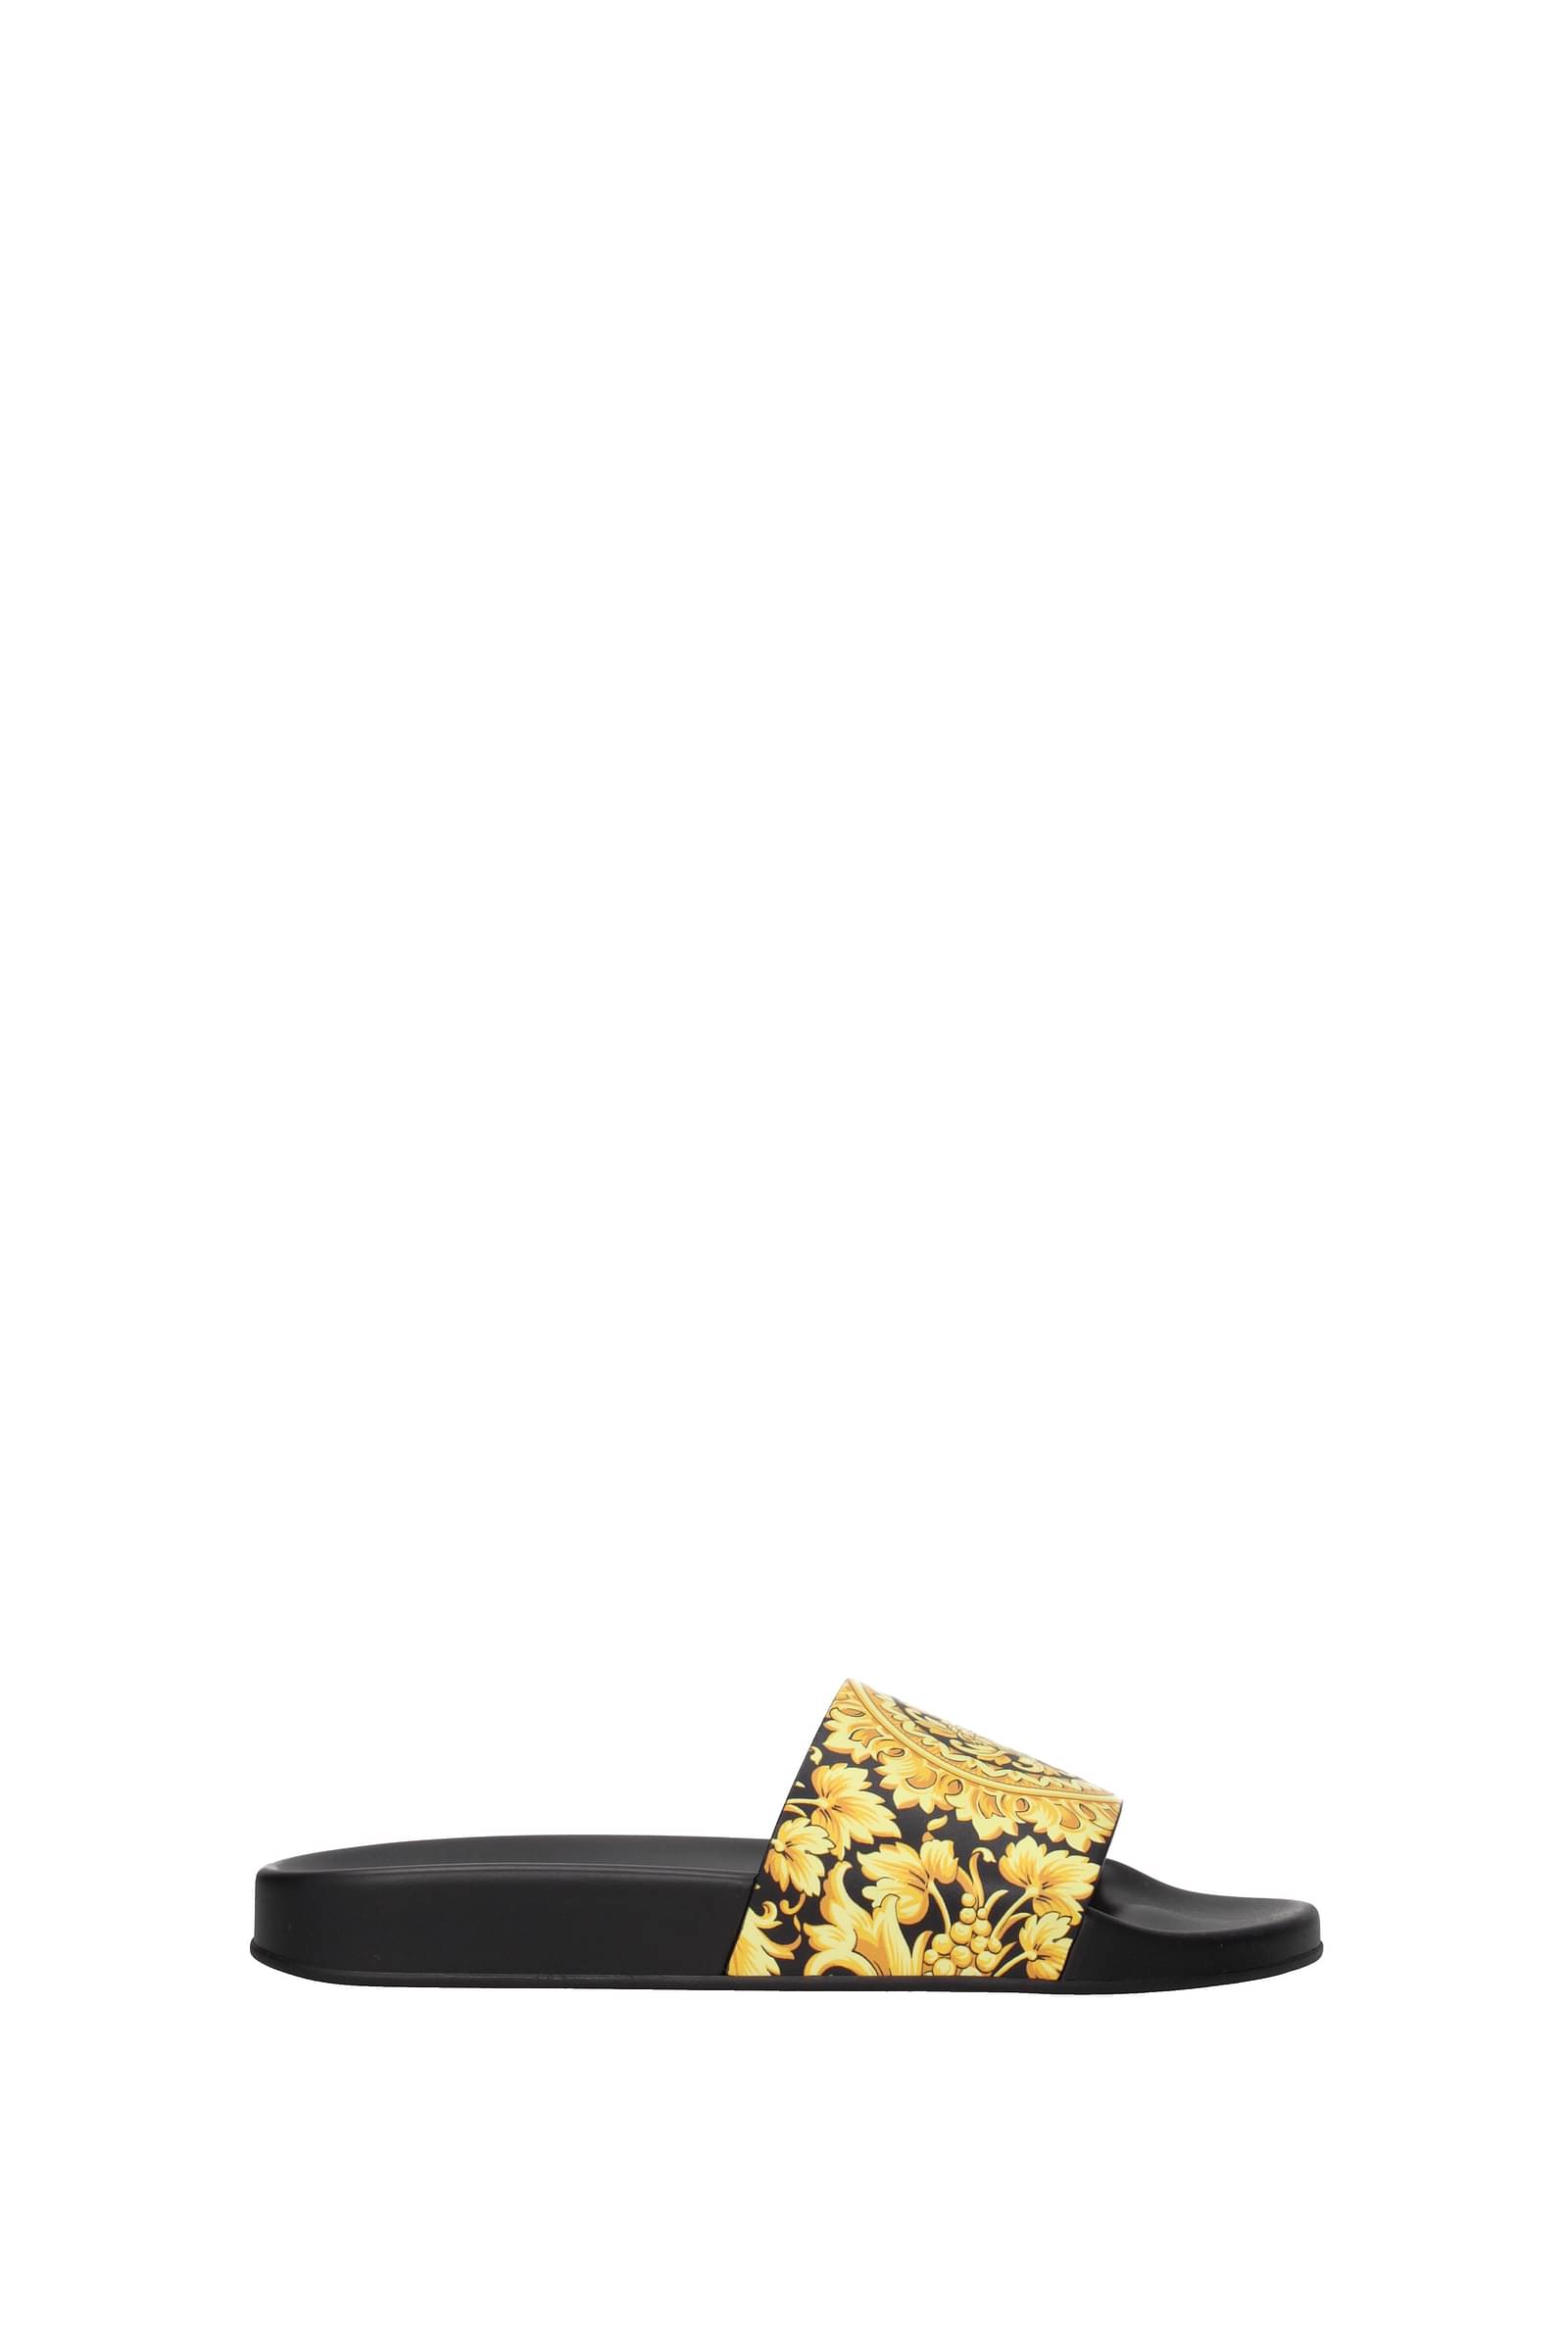 Versace Slippers and clogs Women 1004195D61VG5B000 Rubber Gold 196,88€